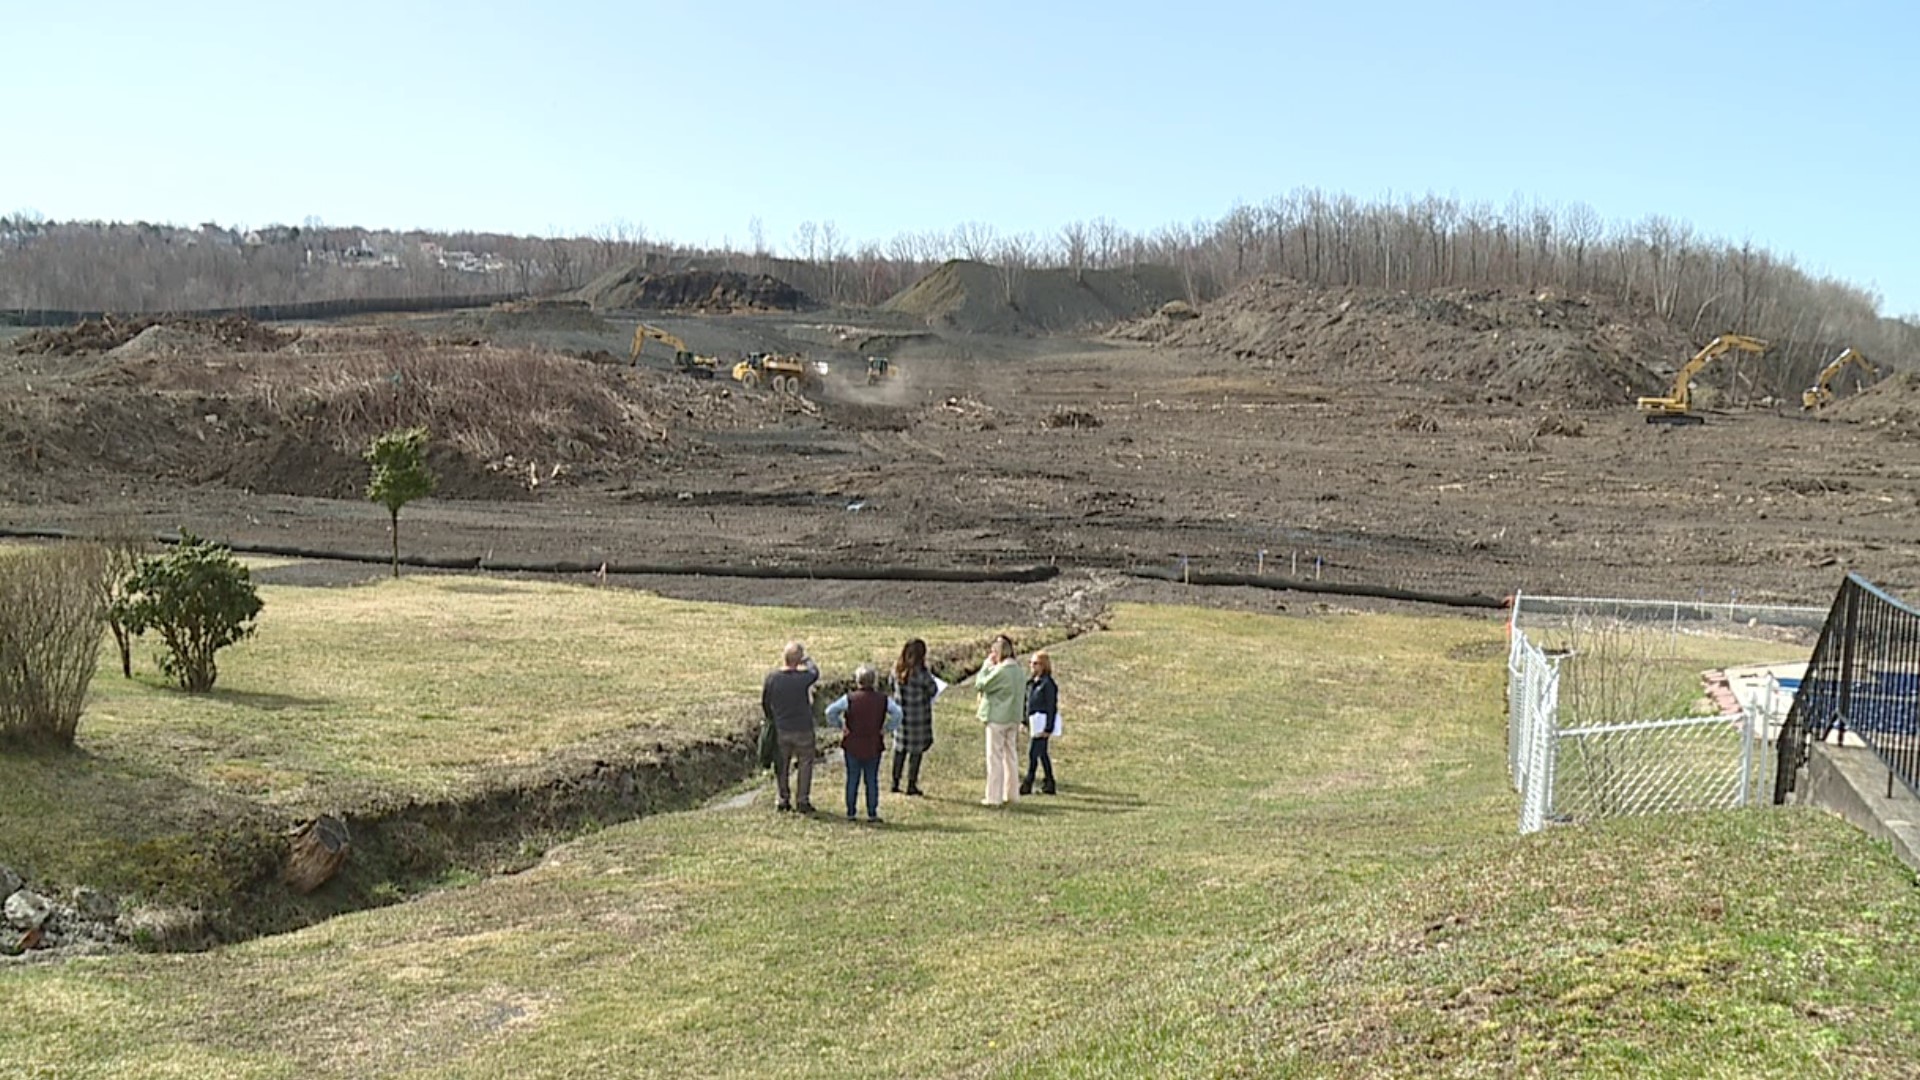 From a beautiful backyard view to a junkyard -homeowners in Luzerne County are angry over a car auction yard coming to their street.